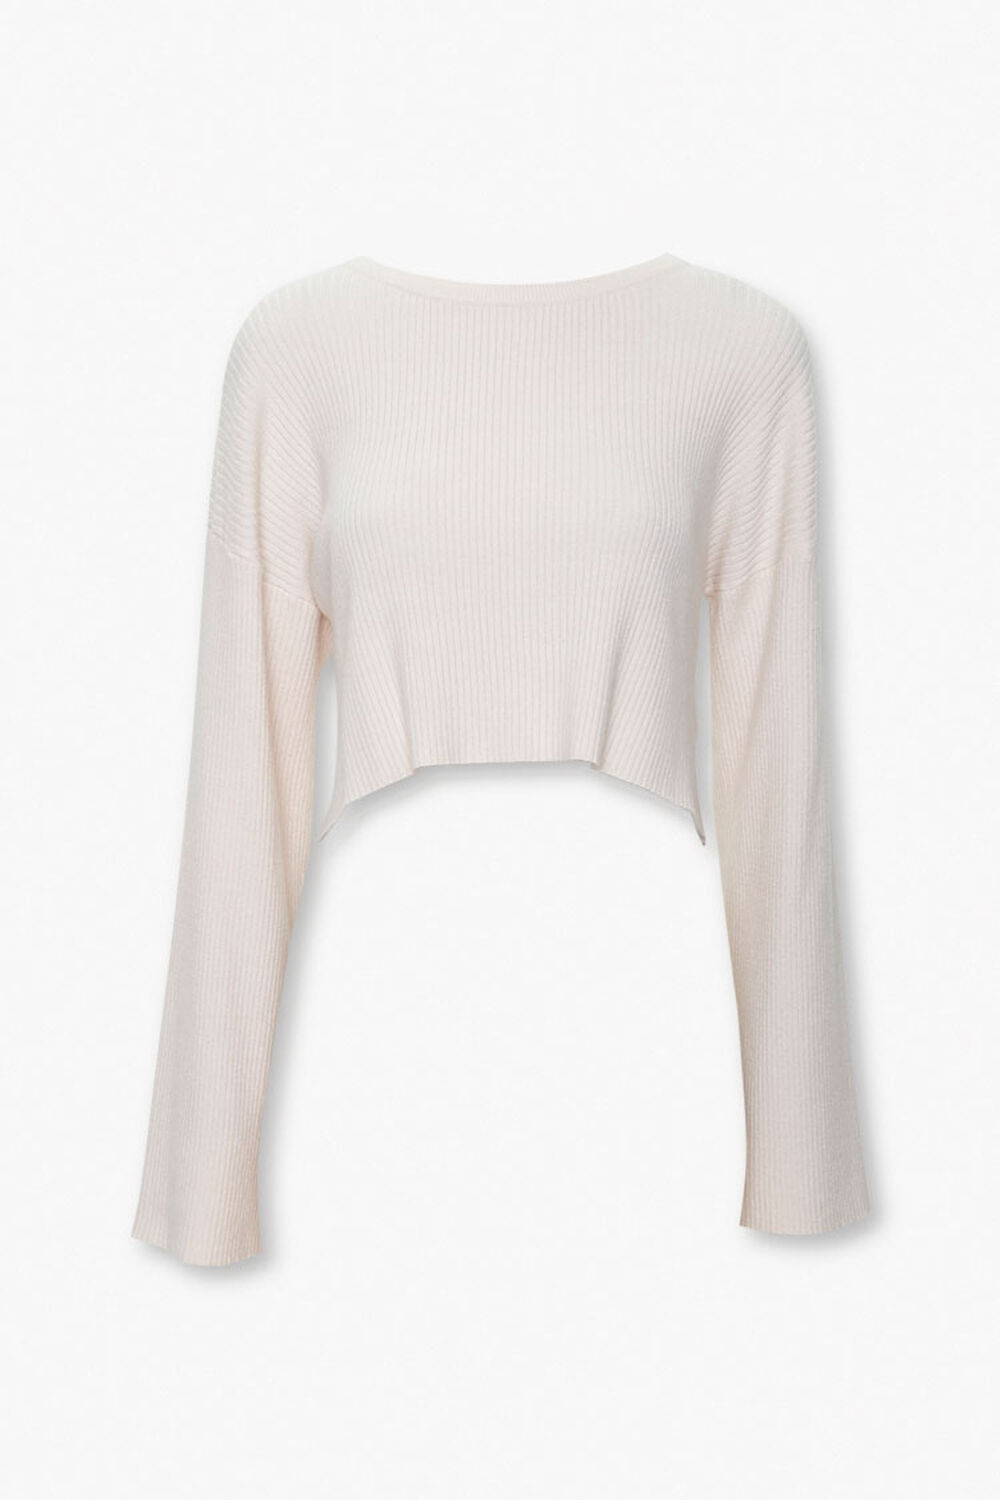 Cropped Bell-Sleeve Sweater, image 1